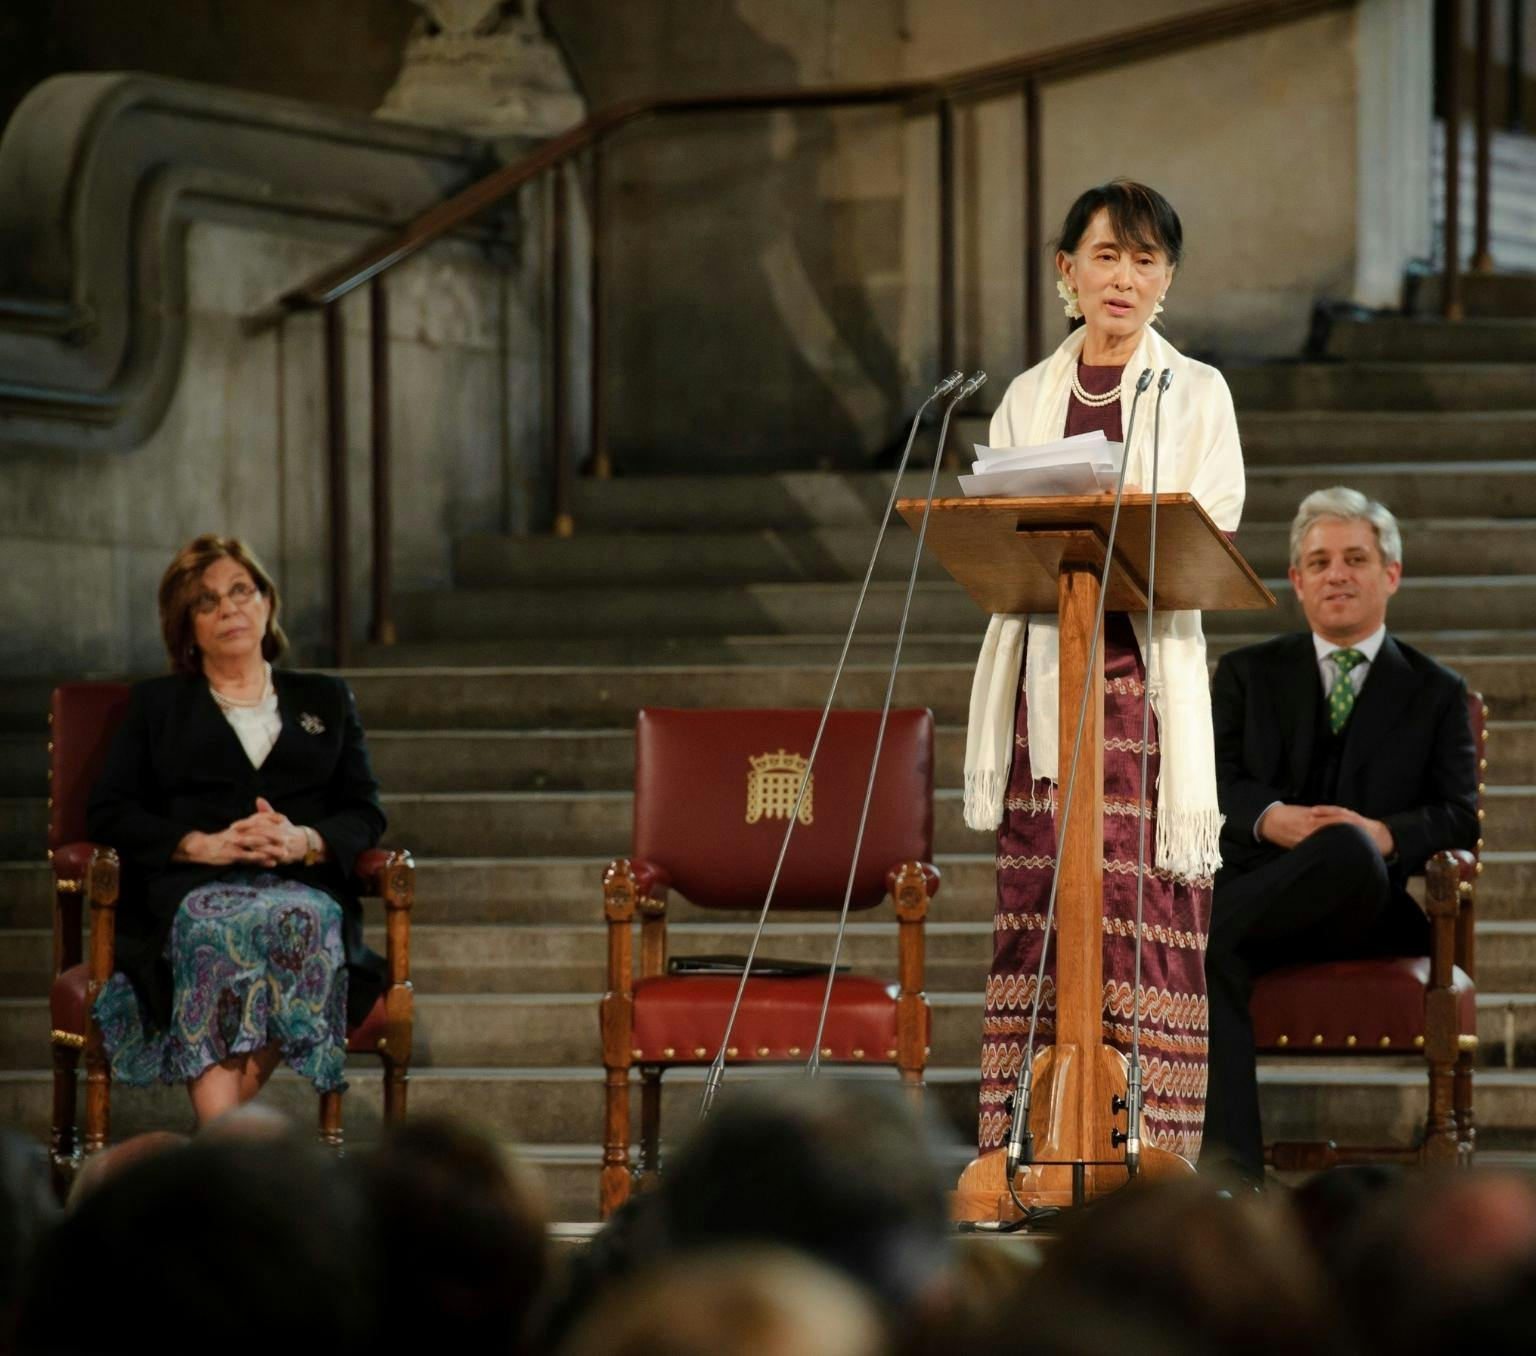 Aung San Suu Kyi is weraing a dark purple dress and a white shall. She is standing at a wooden lecturn and is mid speech. Behind he is a woman and a man stting in chairs watching her speak.